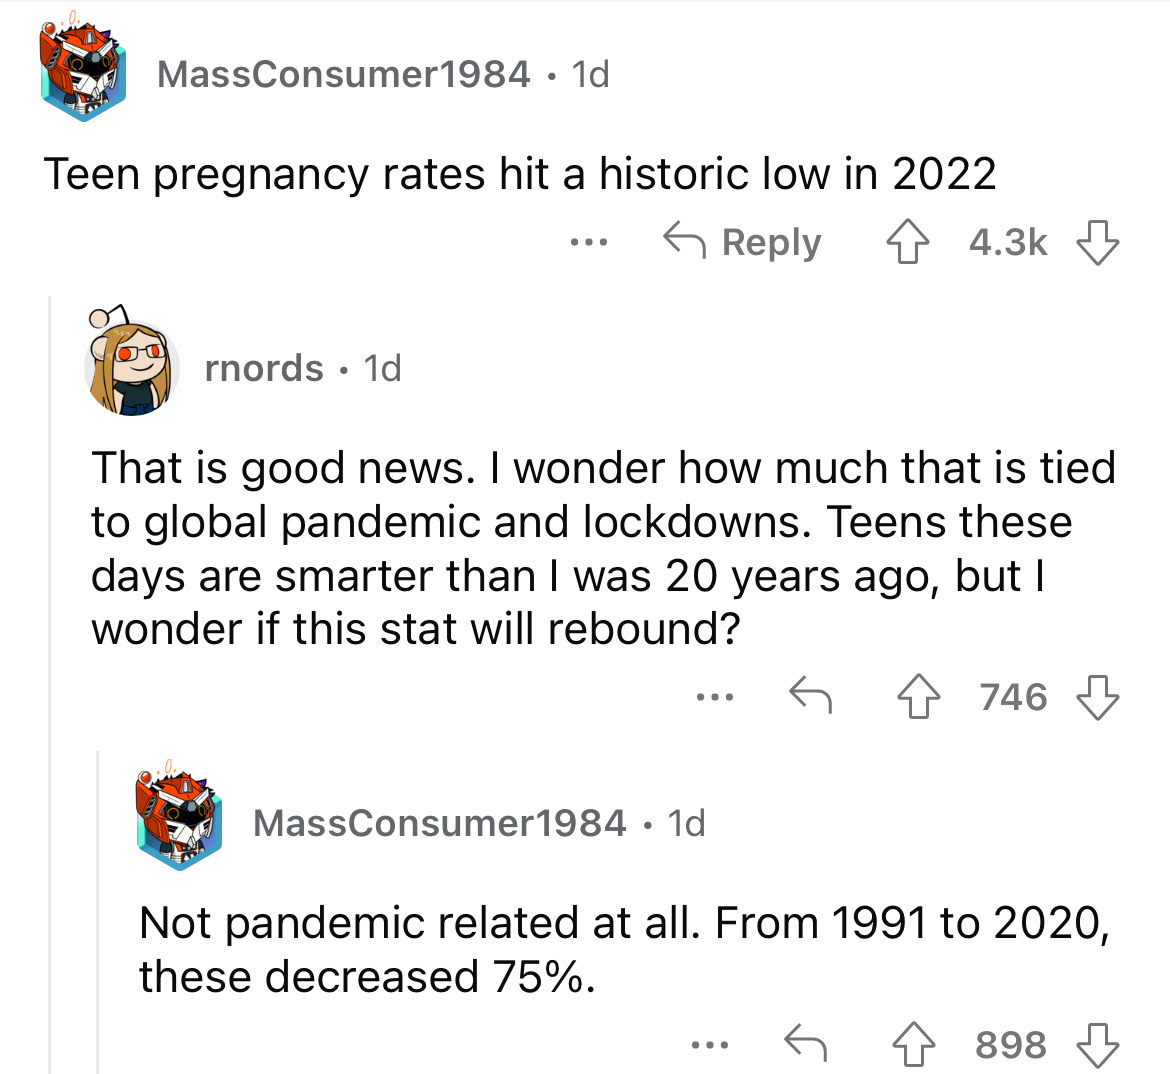 angle - MassConsumer1984 1d Teen pregnancy rates hit a historic low in 2022 rnords. 1d ... That is good news. I wonder how much that is tied to global pandemic and lockdowns. Teens these days are smarter than I was 20 years ago, but I wonder if this stat 